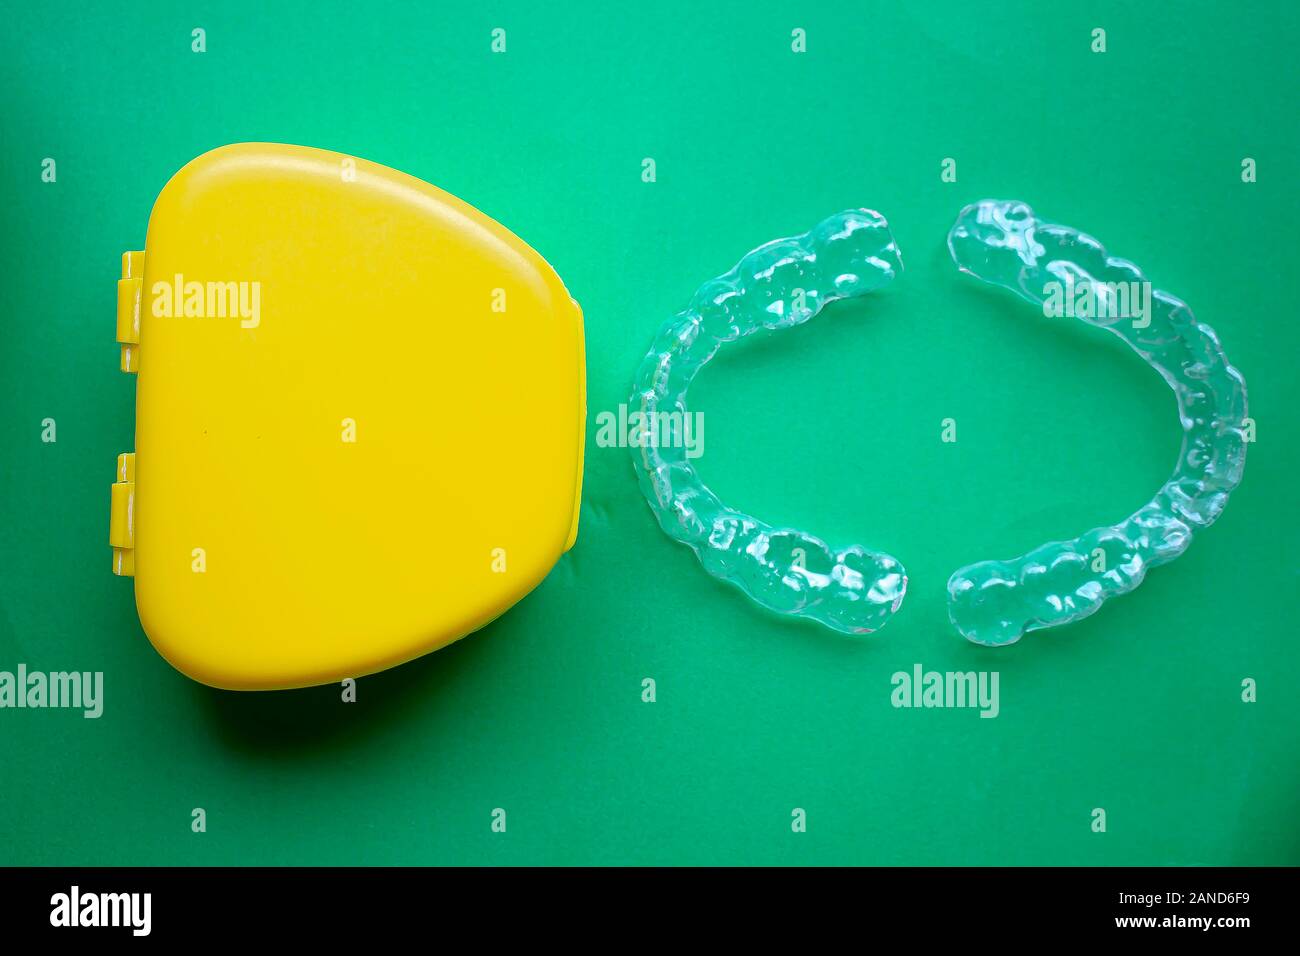 Mouth Guard with a yellow case on the right with green background Stock Photo